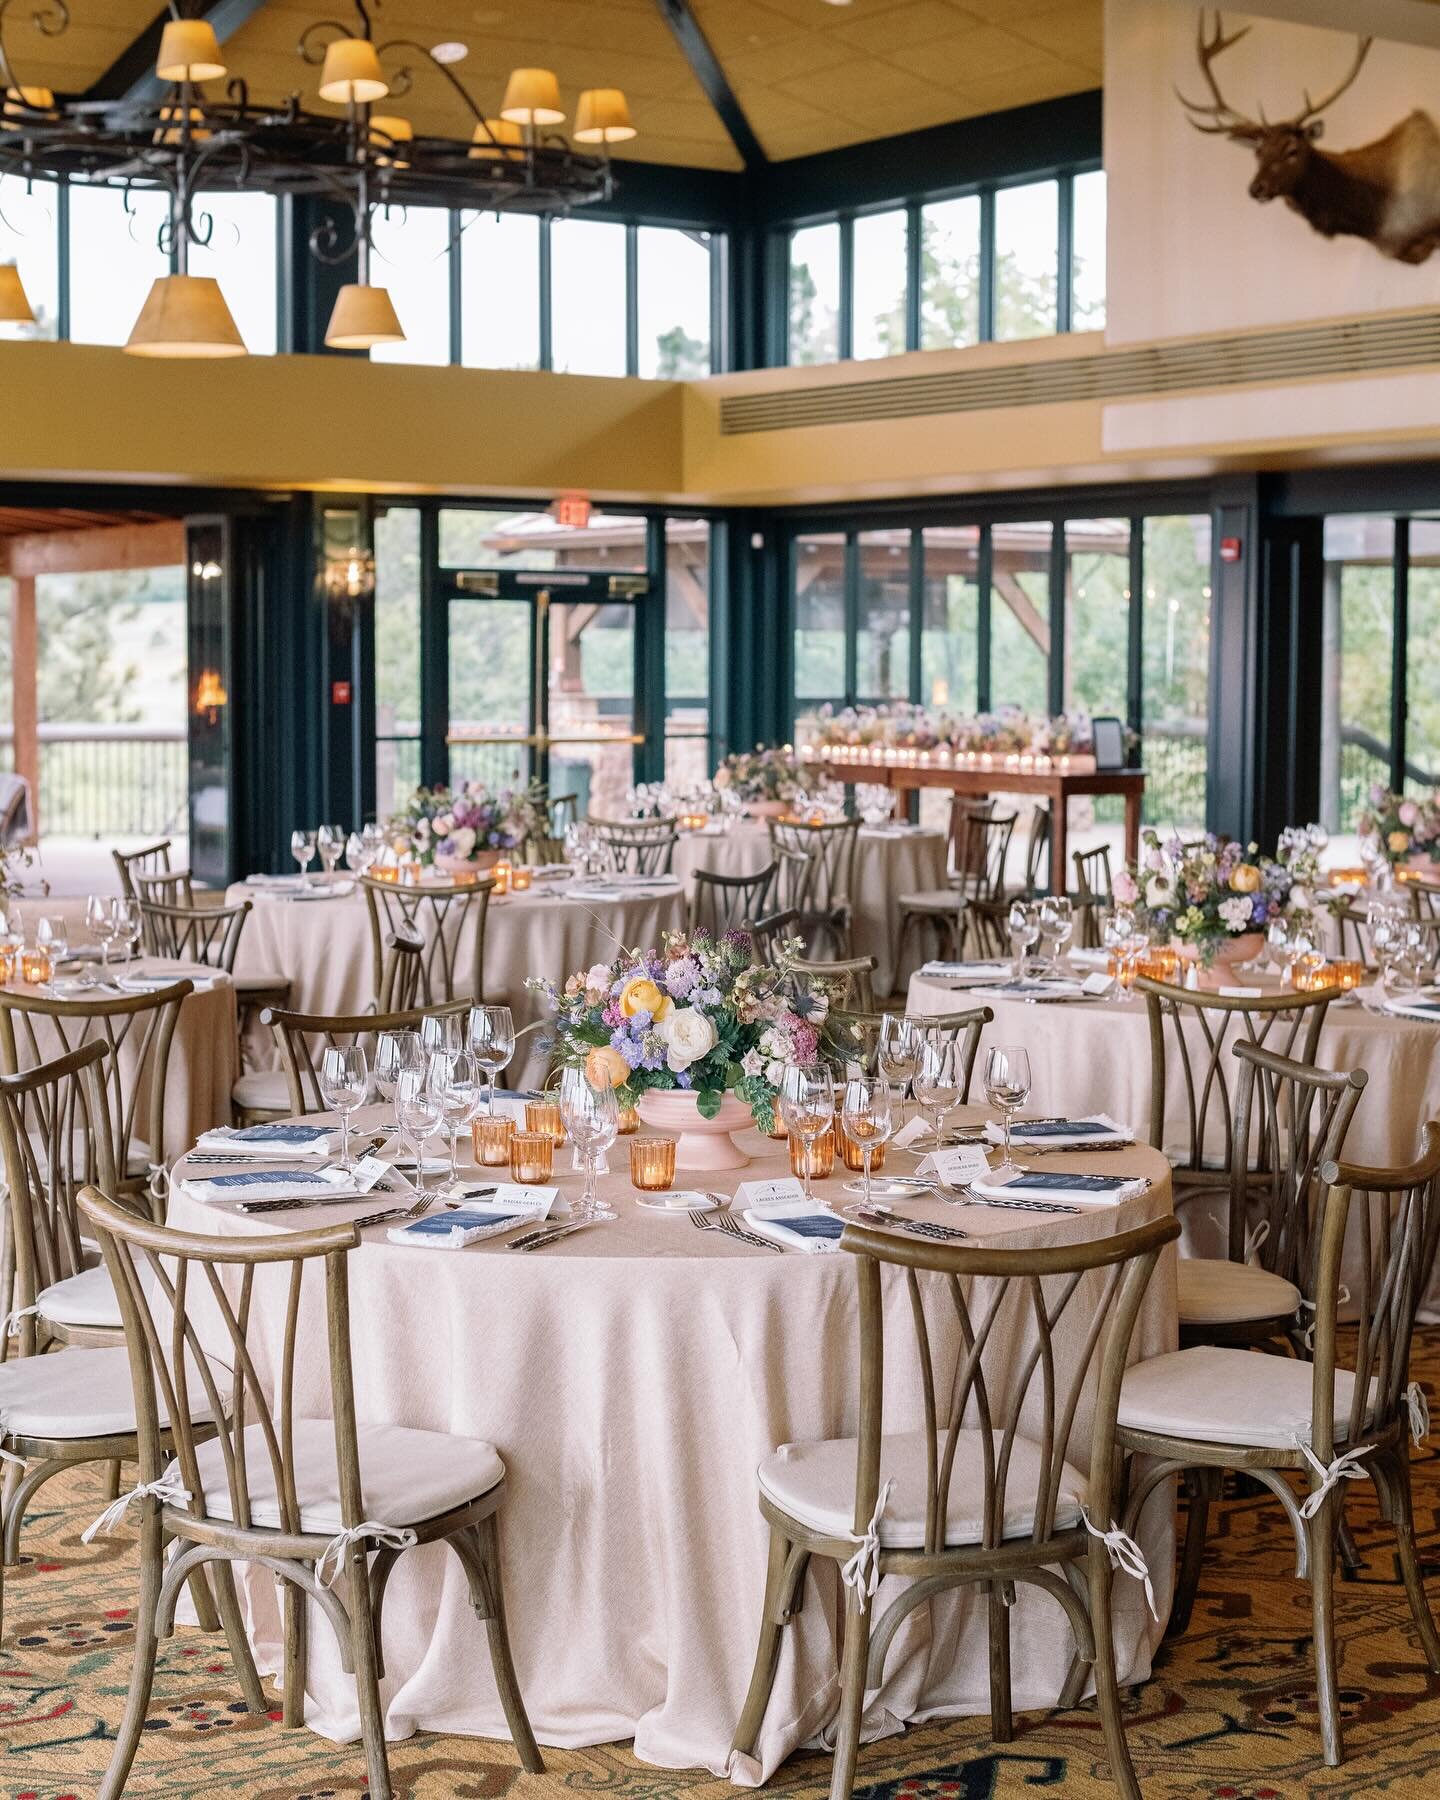 K&amp;D kicked off their wedding weekend at @thebroadmoor with a rehearsal dinner and welcome reception at the Cheyenne Mountain Lodge. Colorful mountain inspired blooms, scenic mountain views, and a custom hat station brought this party to life. 

C